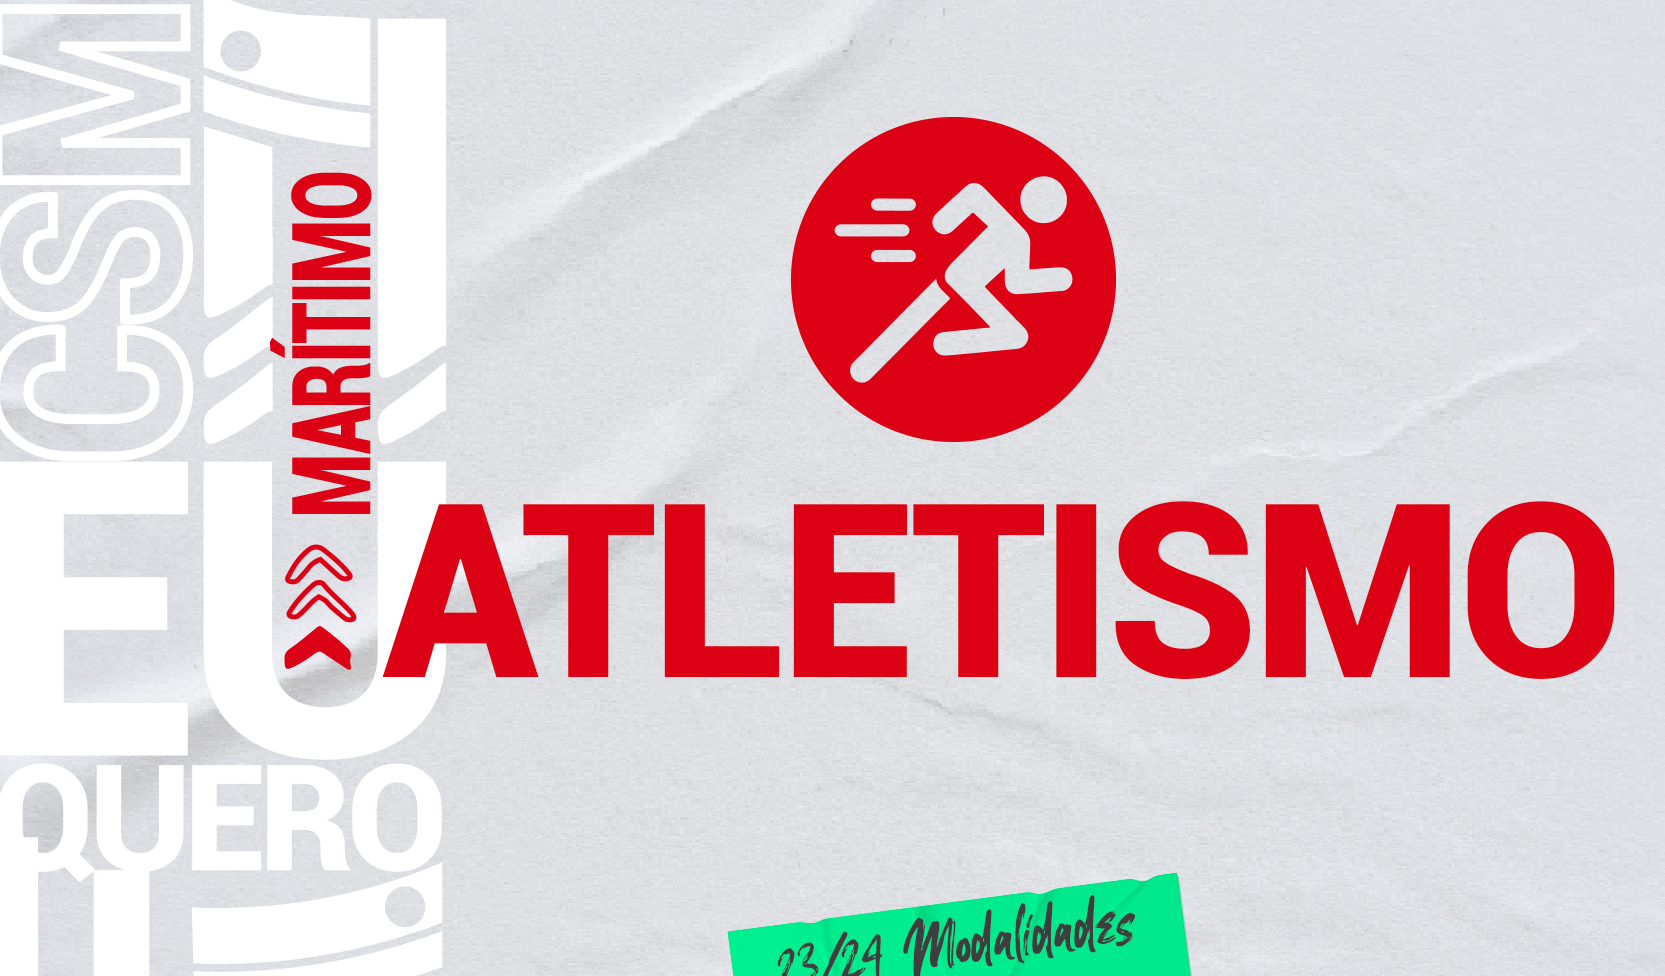 Atletismo - site